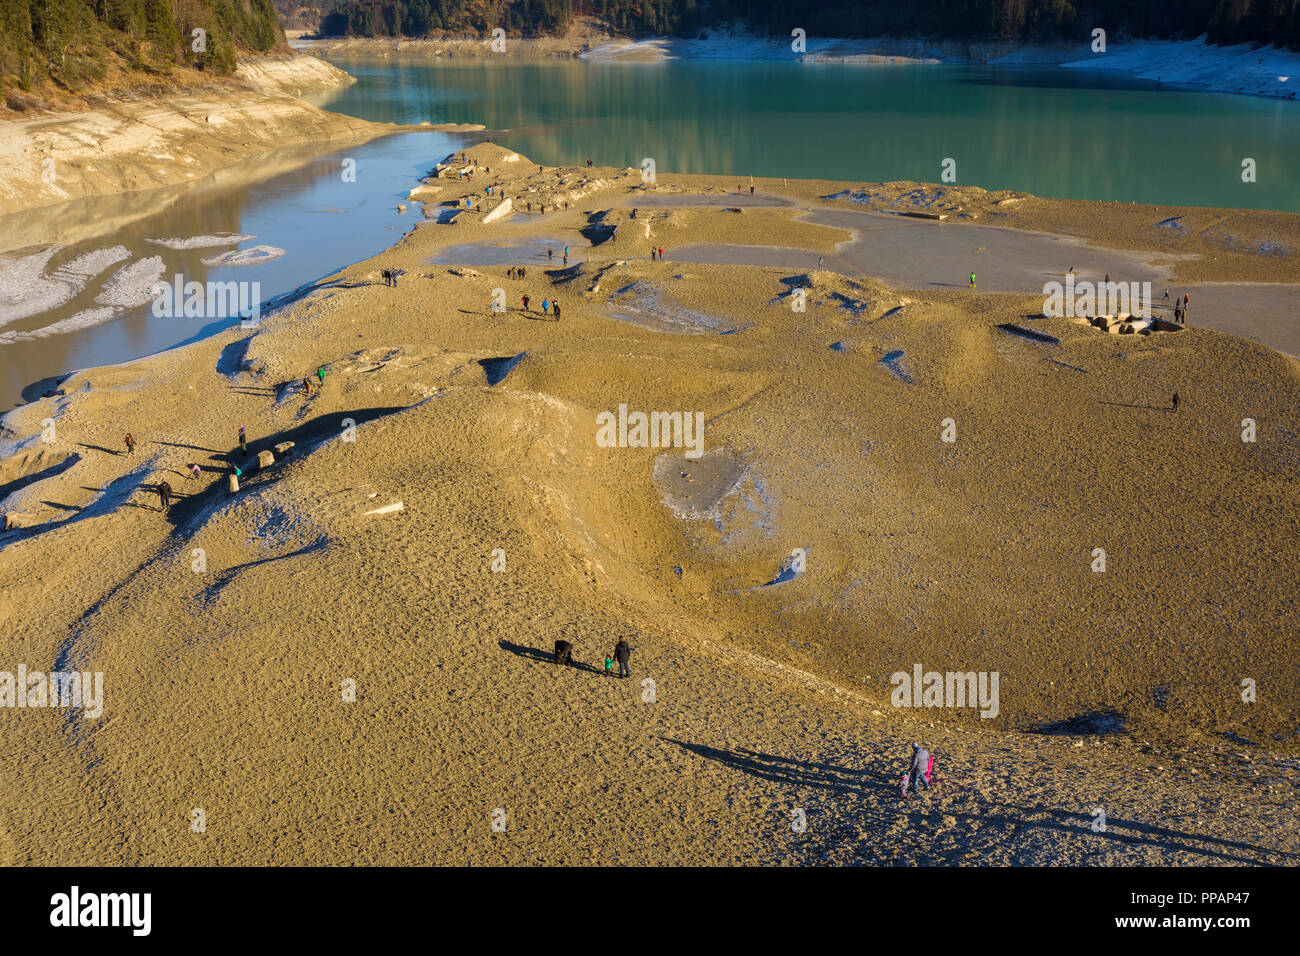 Deflated storage lake with tourists in winter, Sylvenstein Lake, Isartal, Lenggries, Upper Bavaria, Bavaria, Germany, Europe Stock Photo